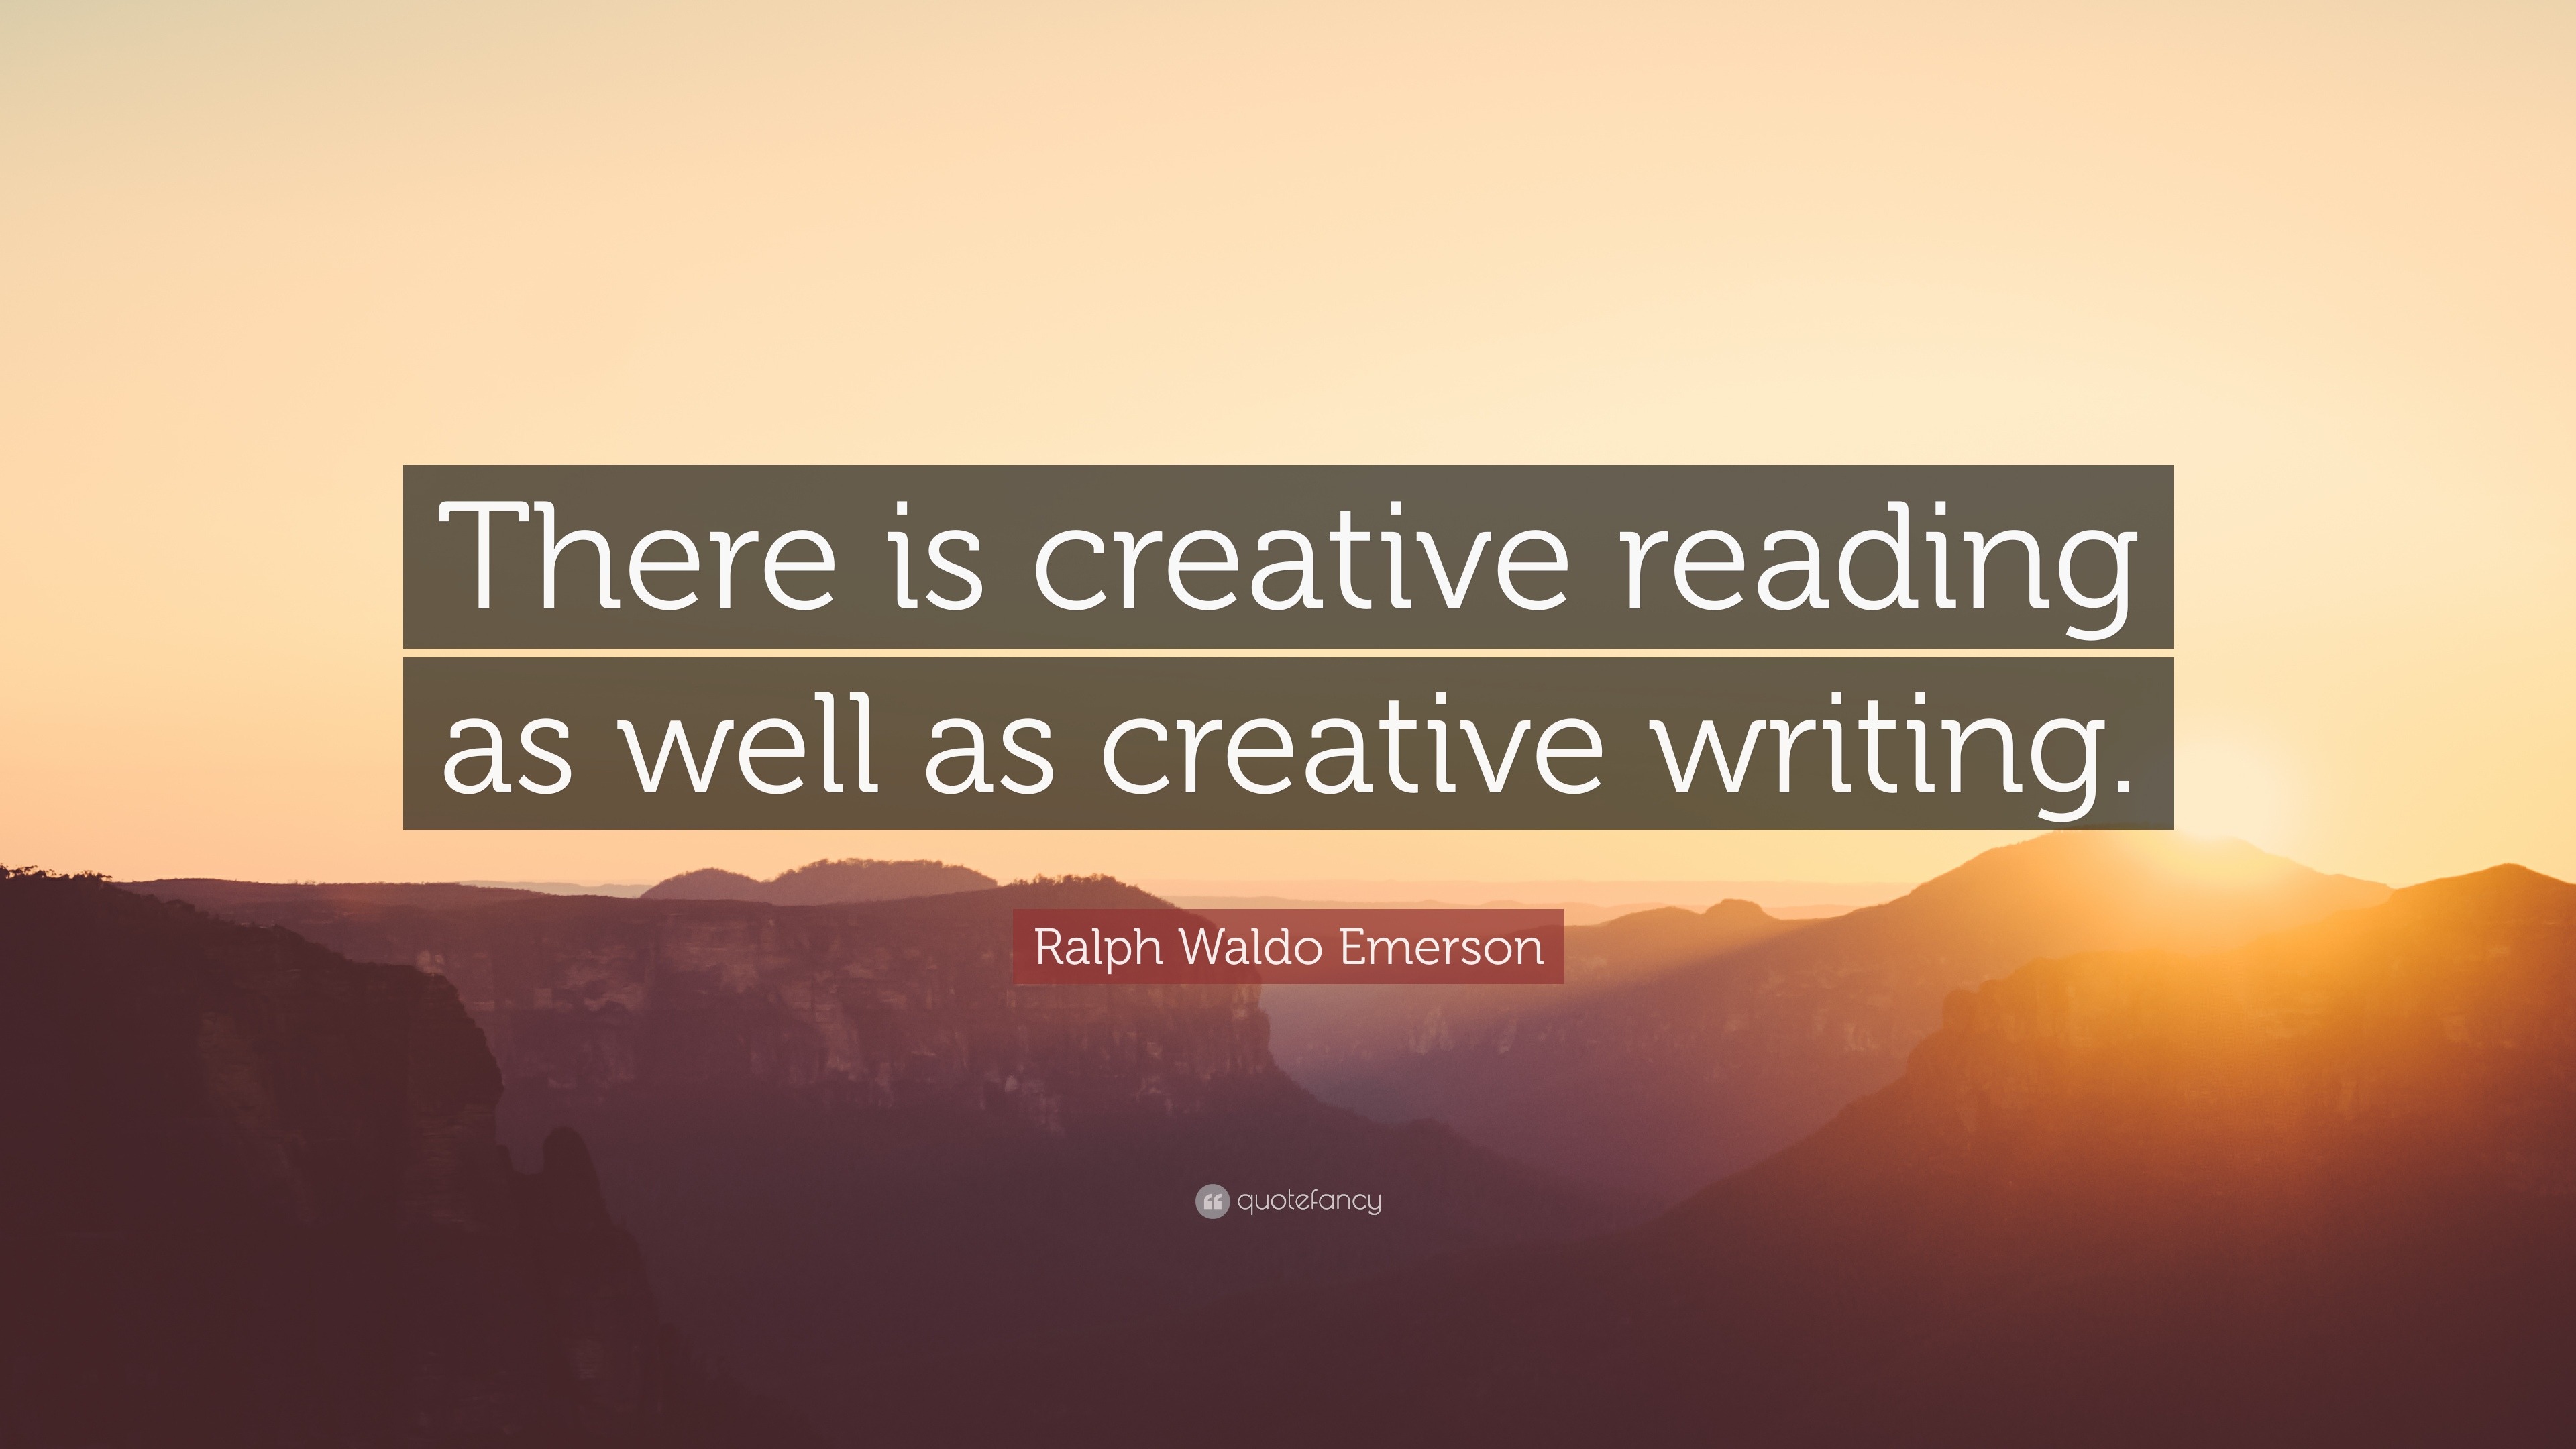 what is creative reading and writing